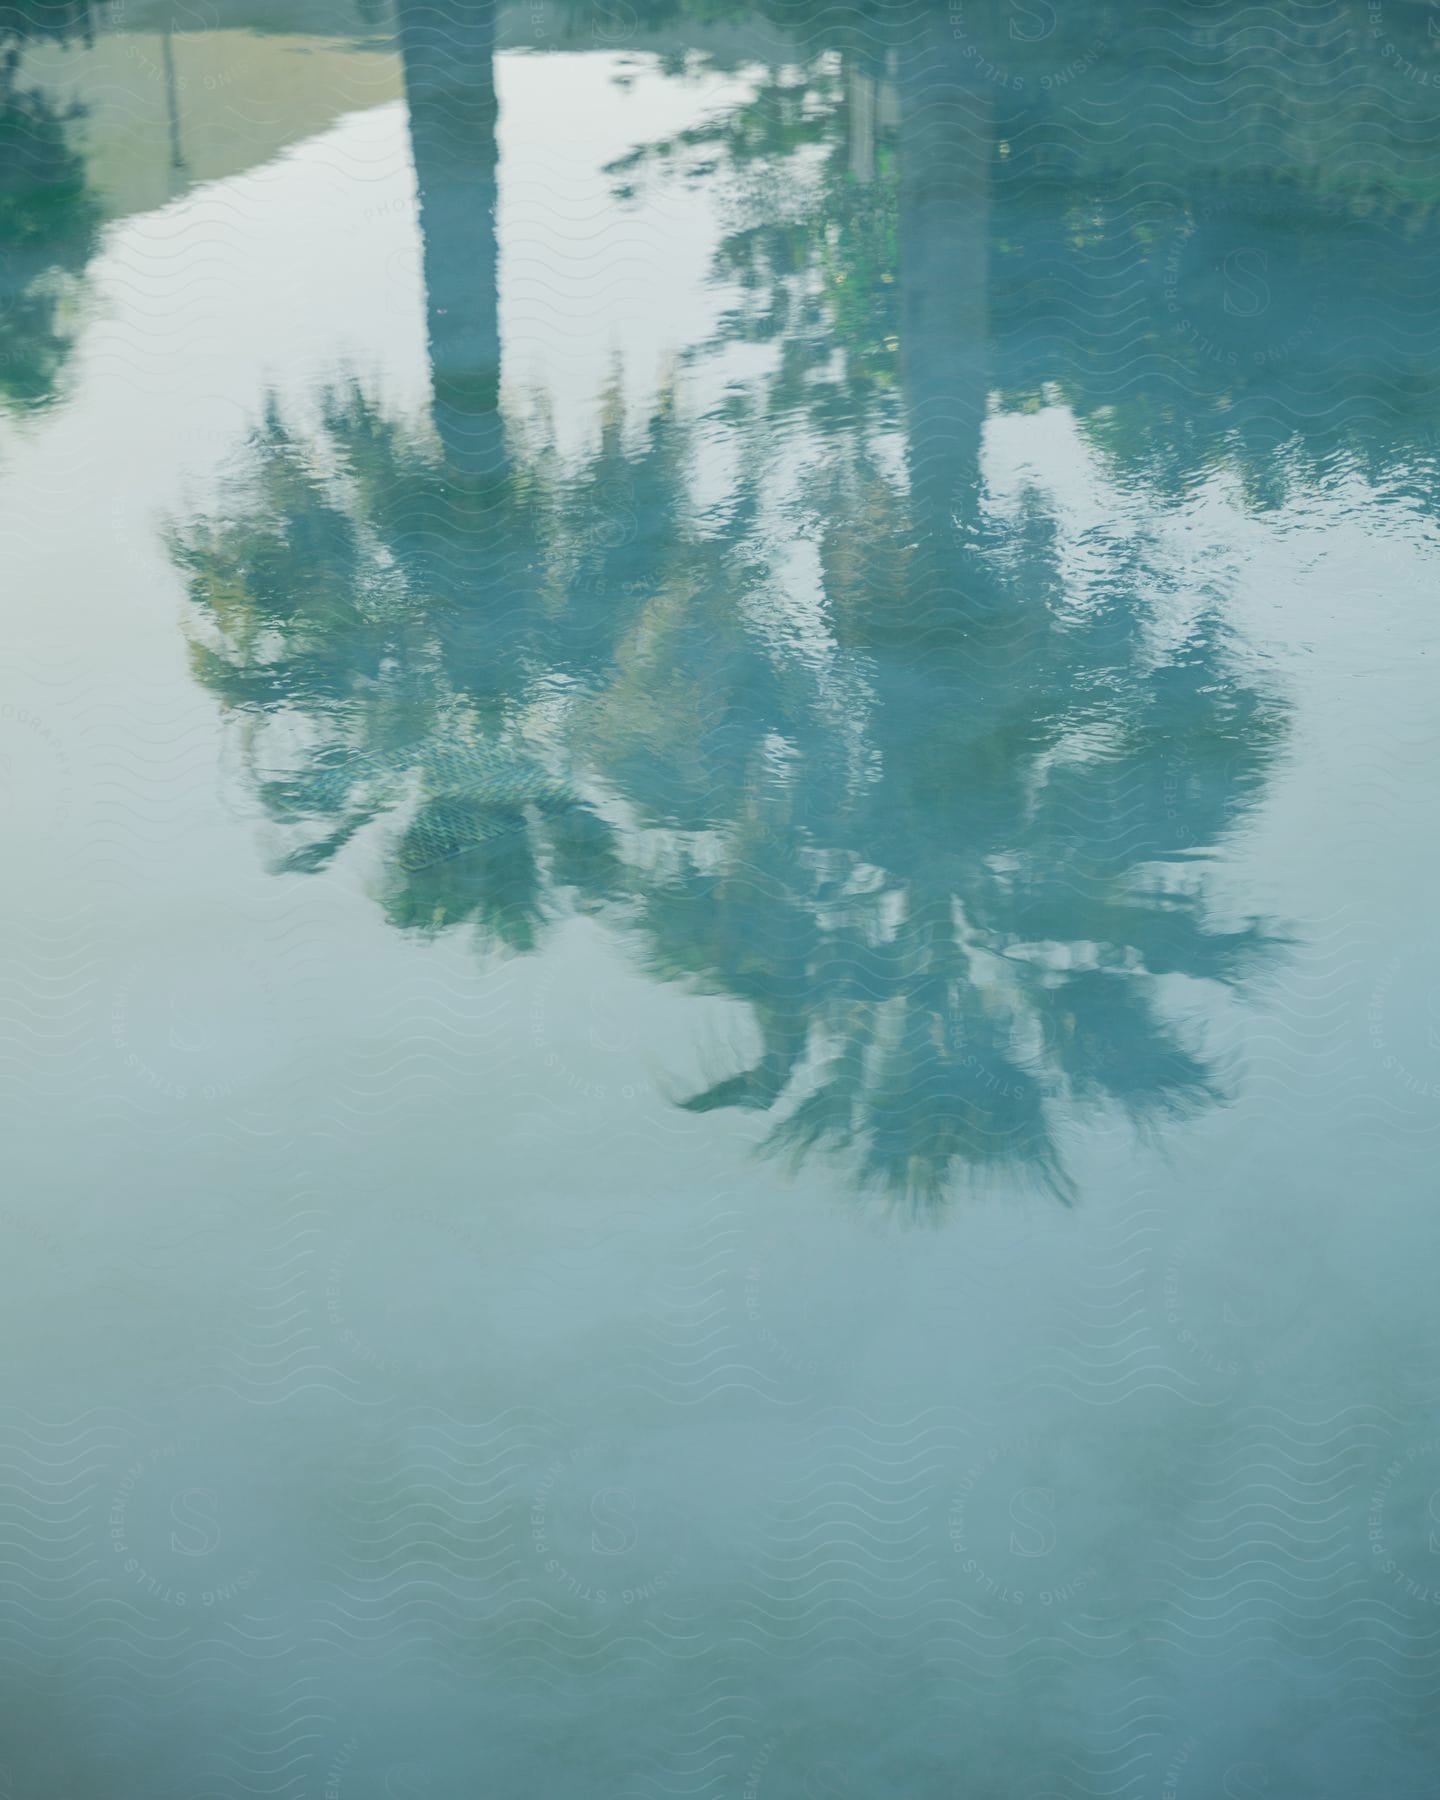 Palm trees reflecting on the water below